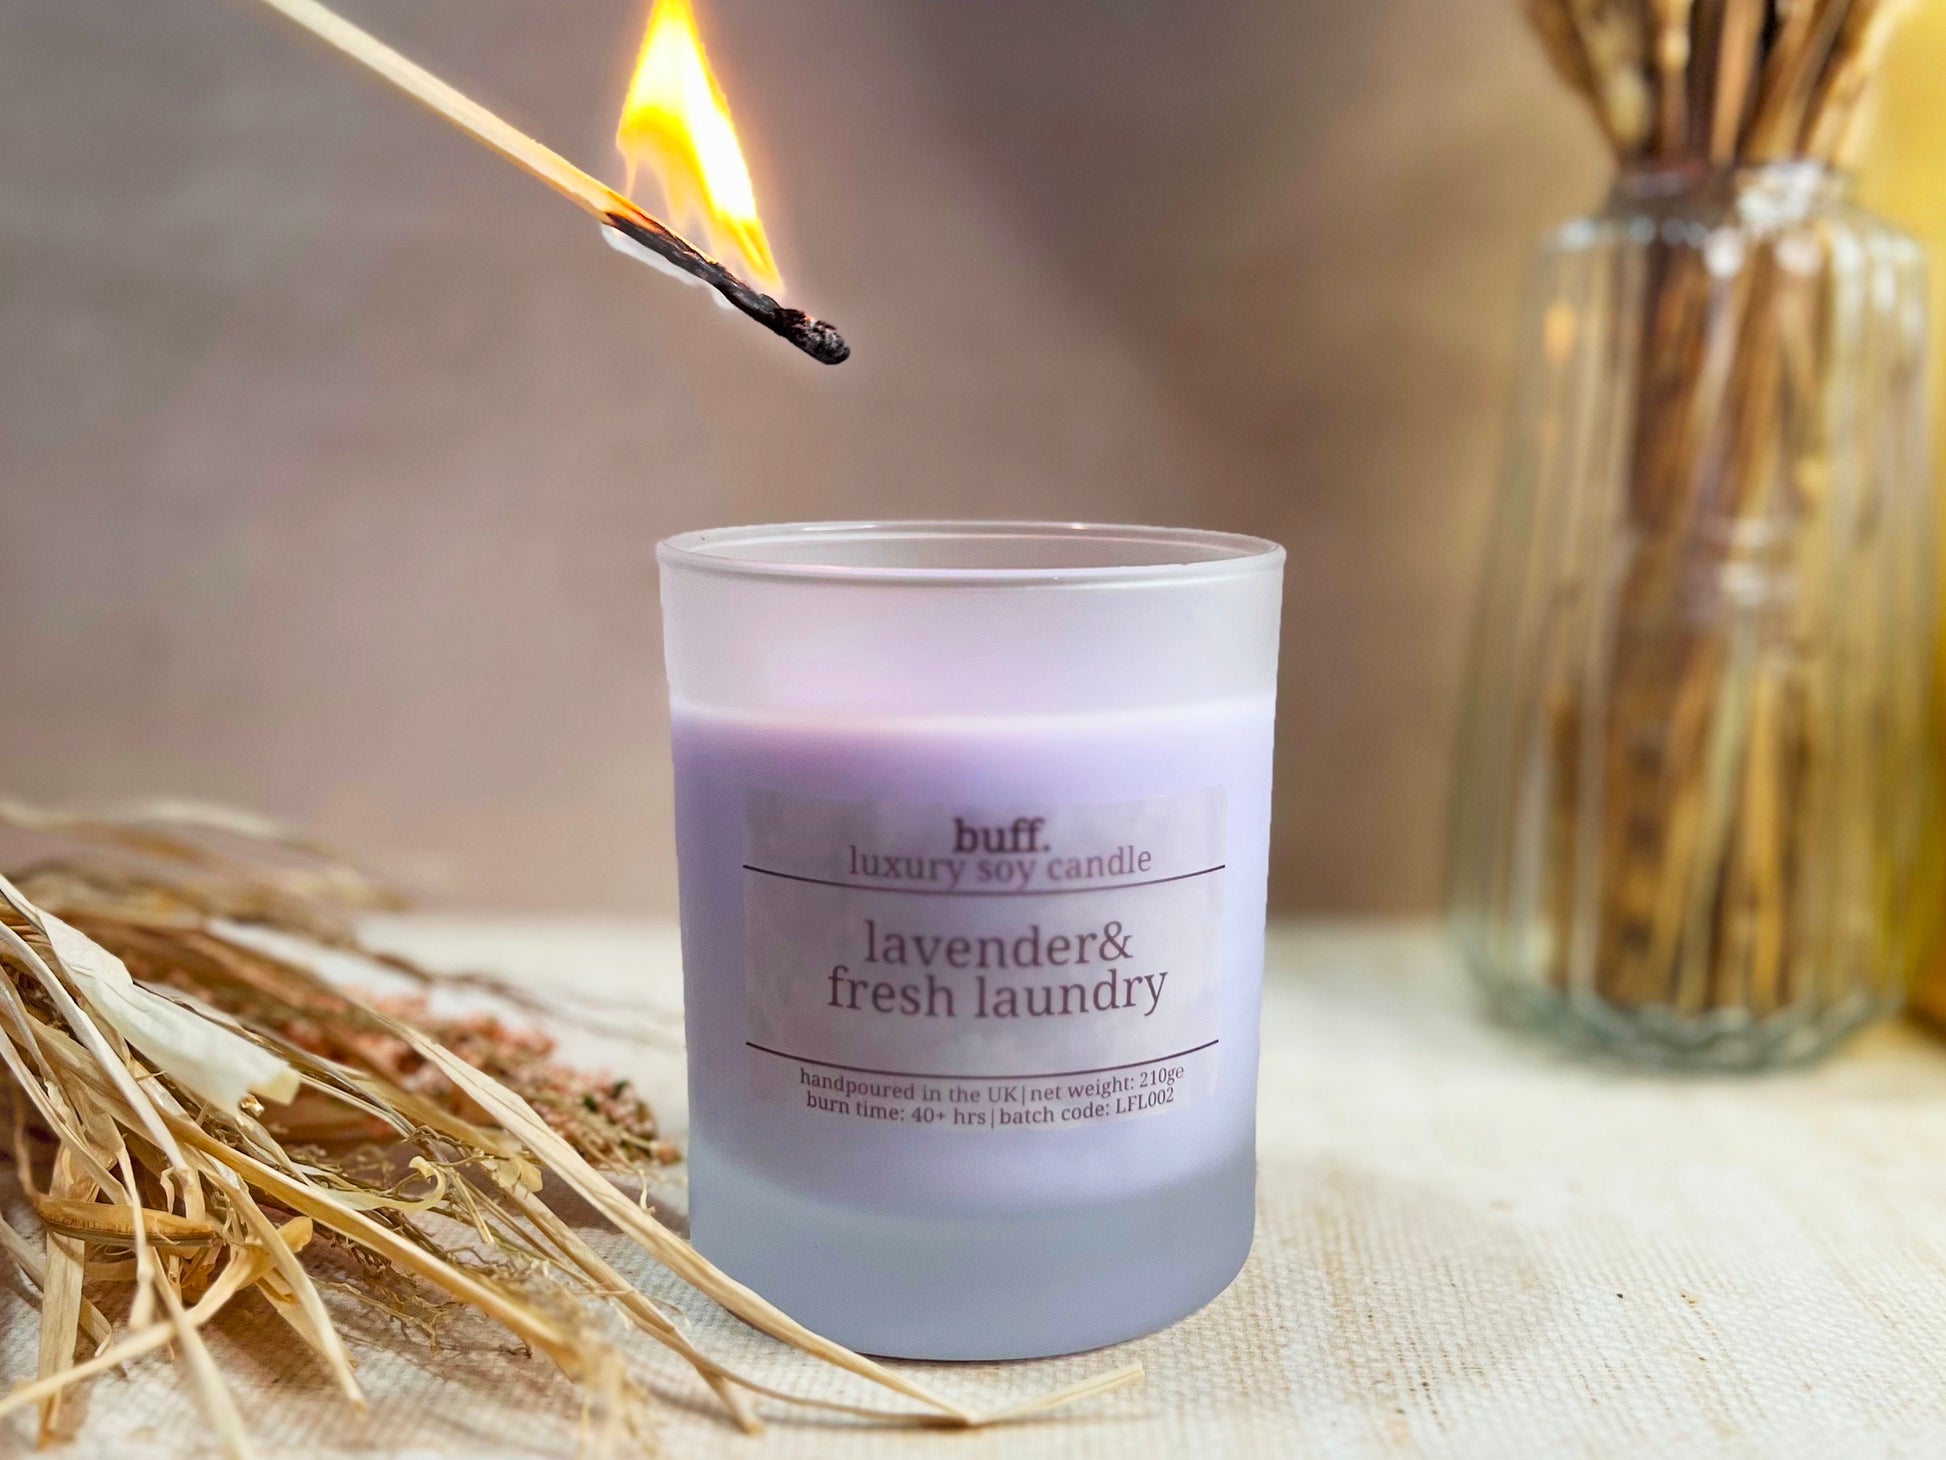 Lavender and Fresh Laundry soy wax candle in frosted glass